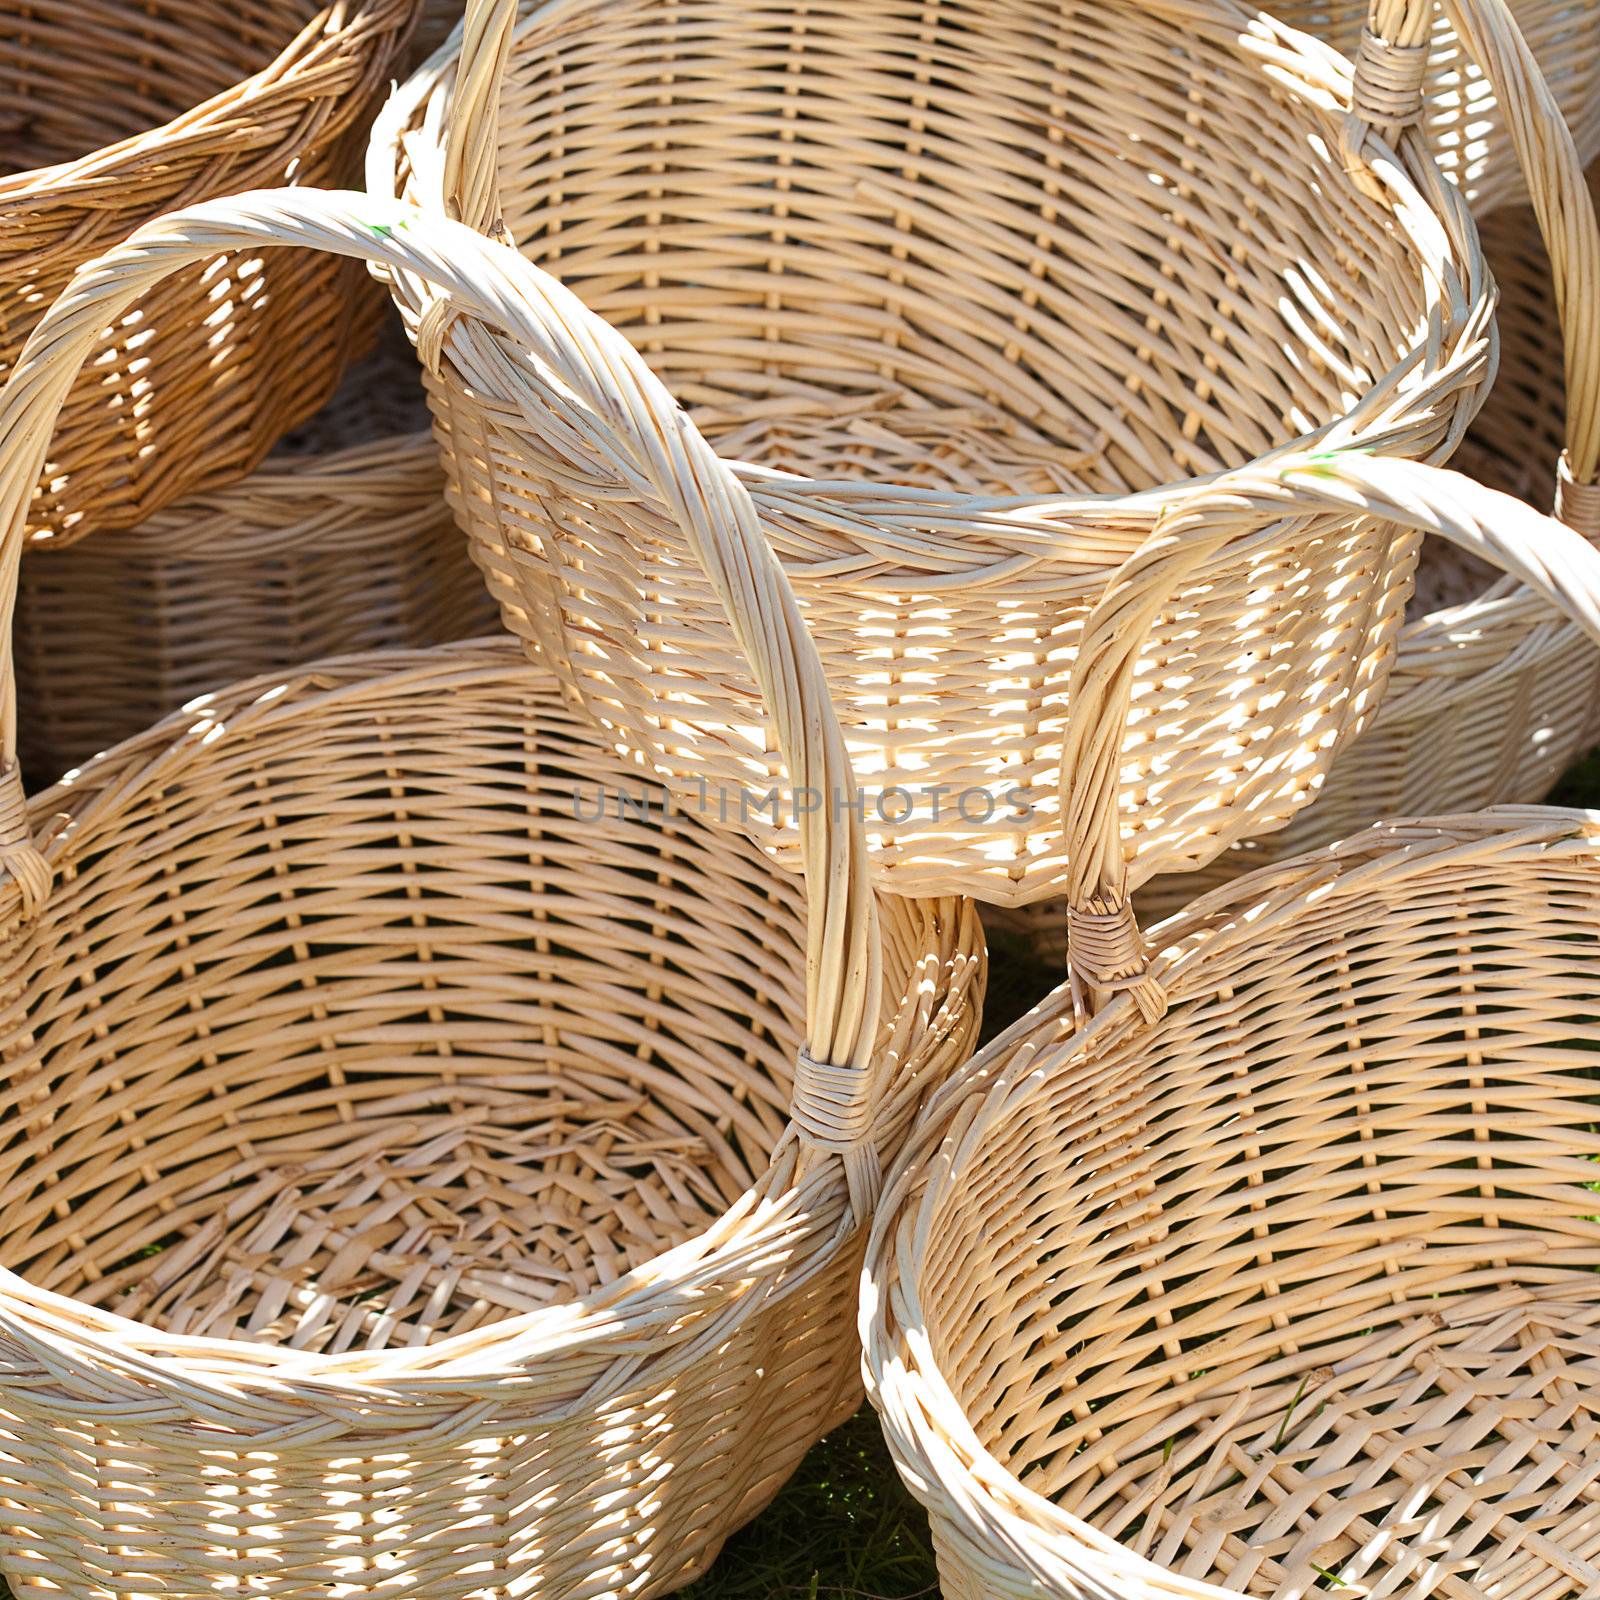 background of the baskets at the fair